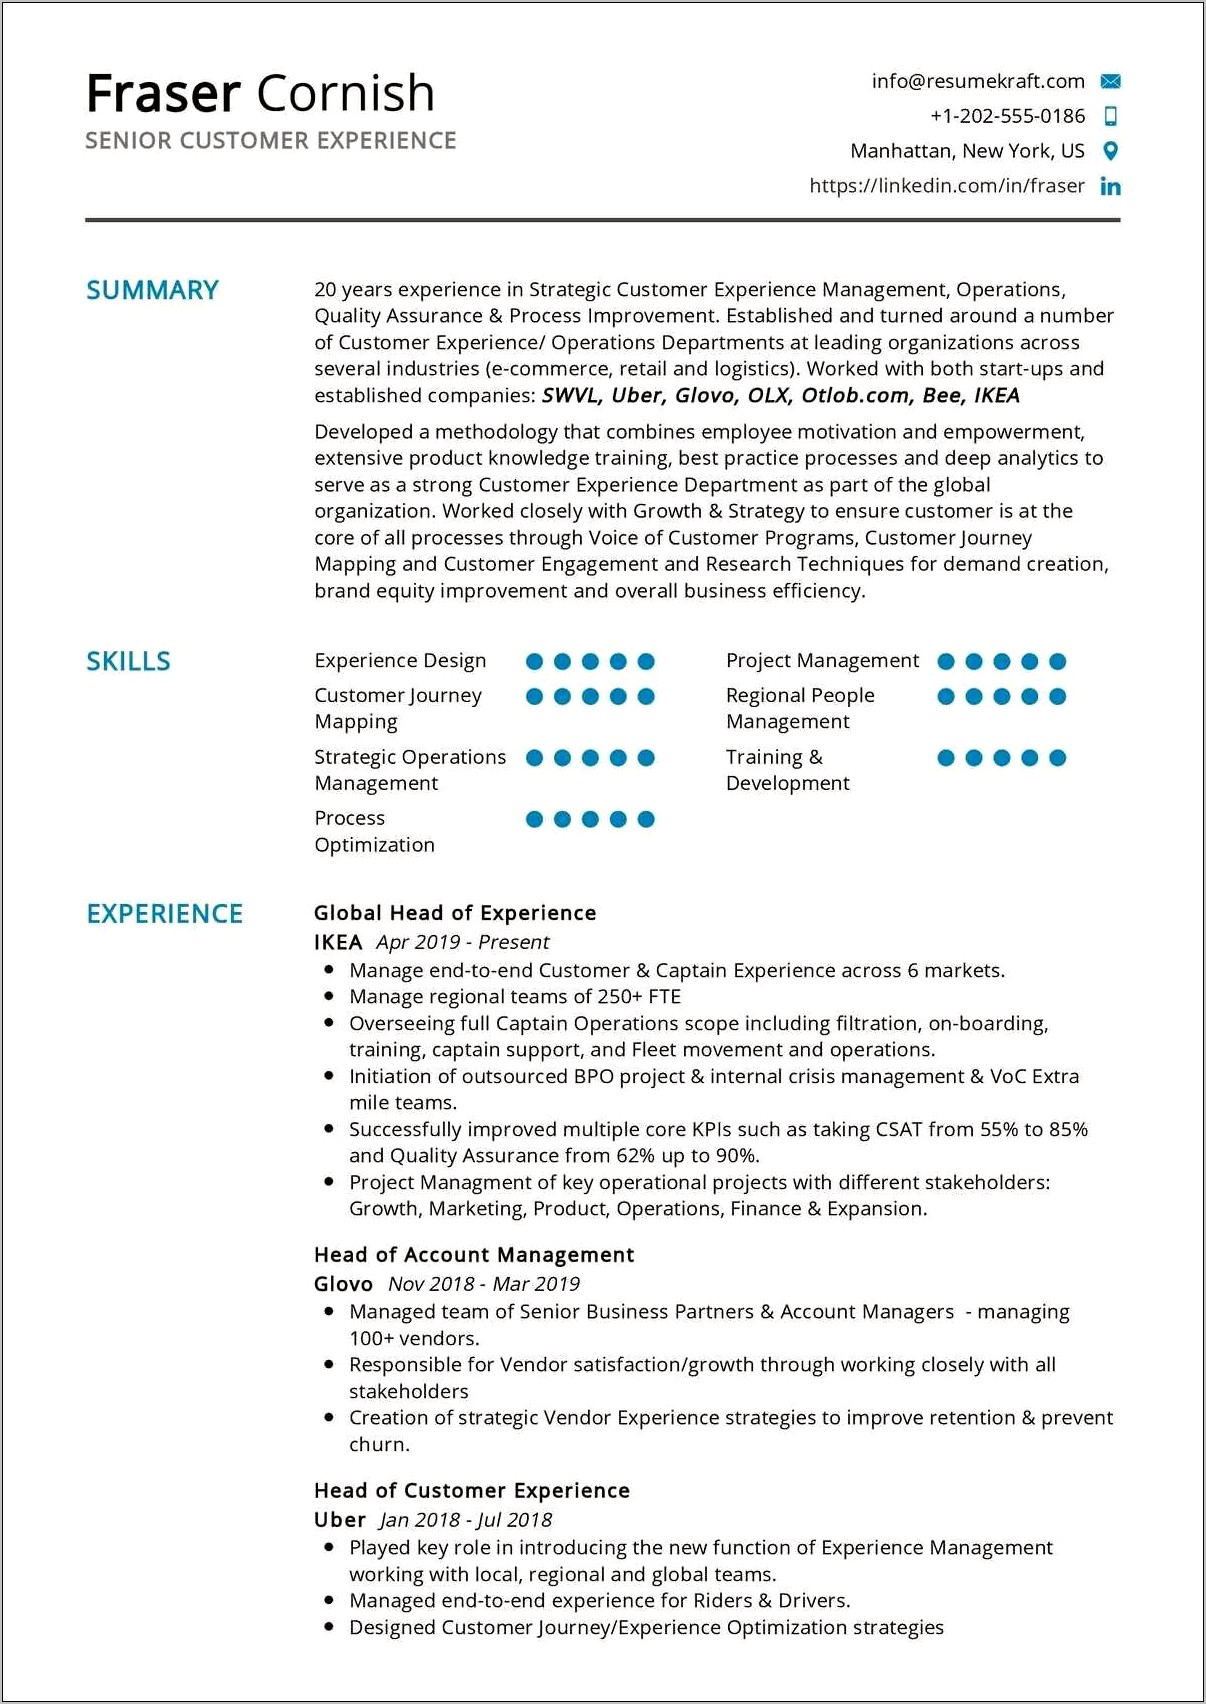 Resume Description For Director Of Client Experience